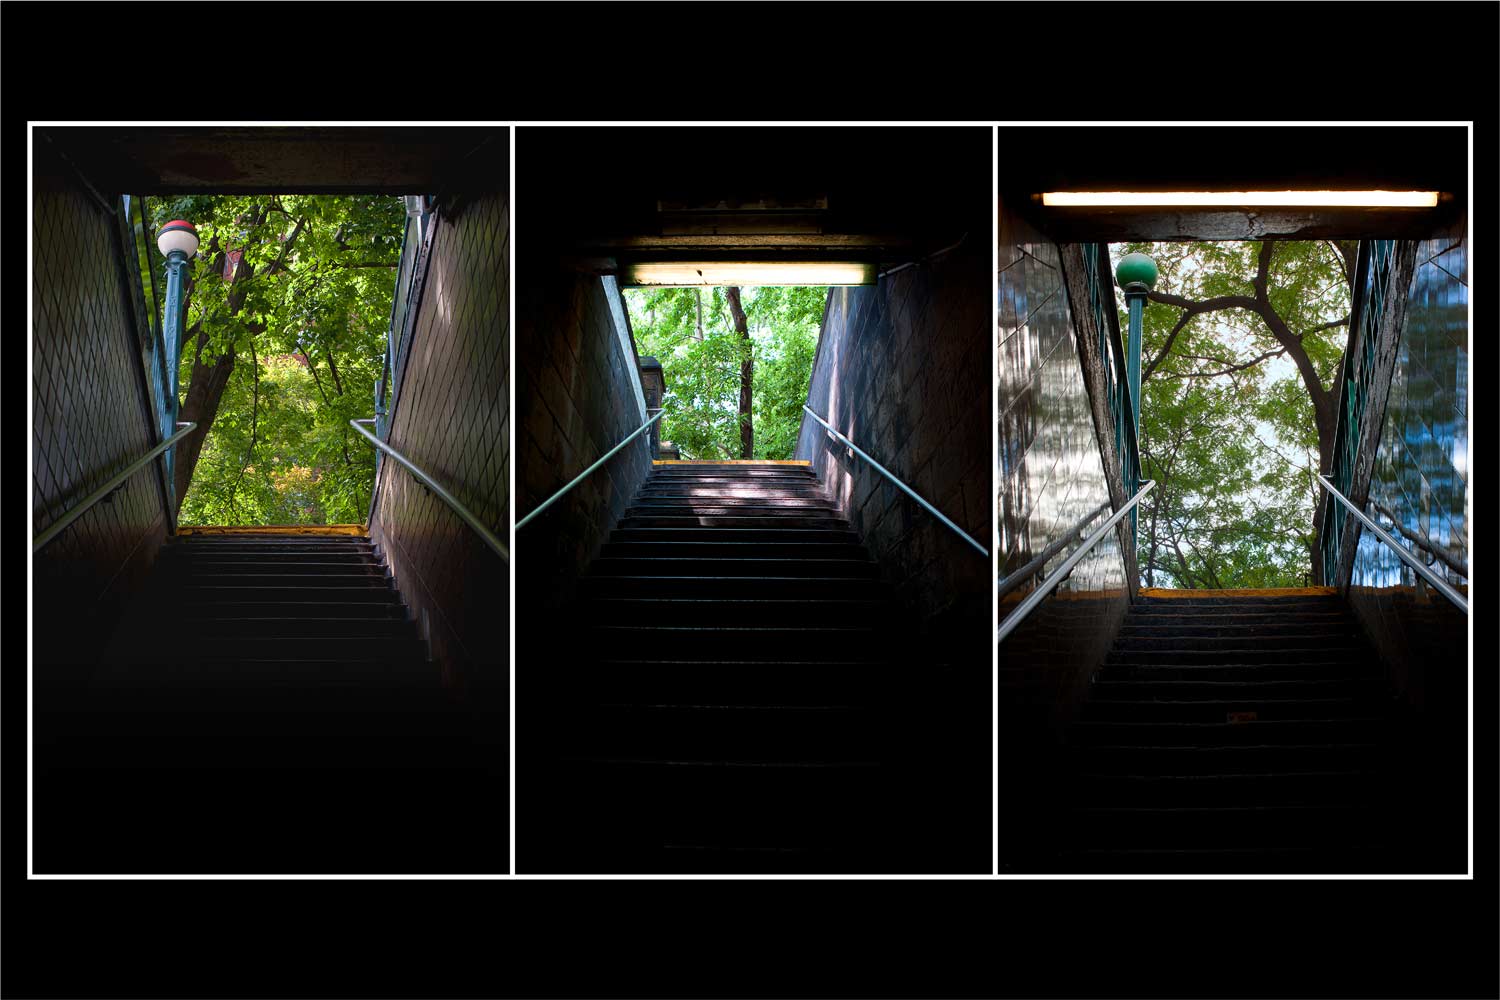 From the series Subway Trapezoids, 2012